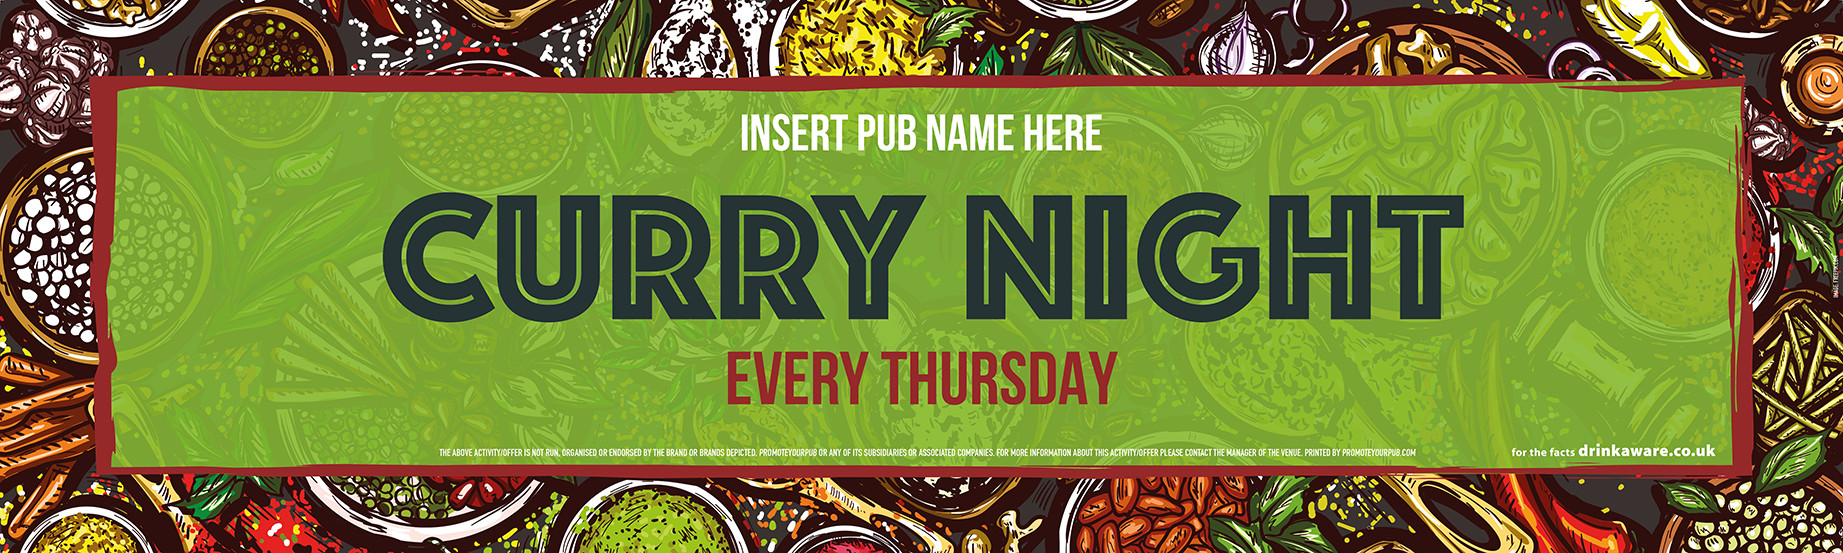 Curry Night Event Banner (Lrg)